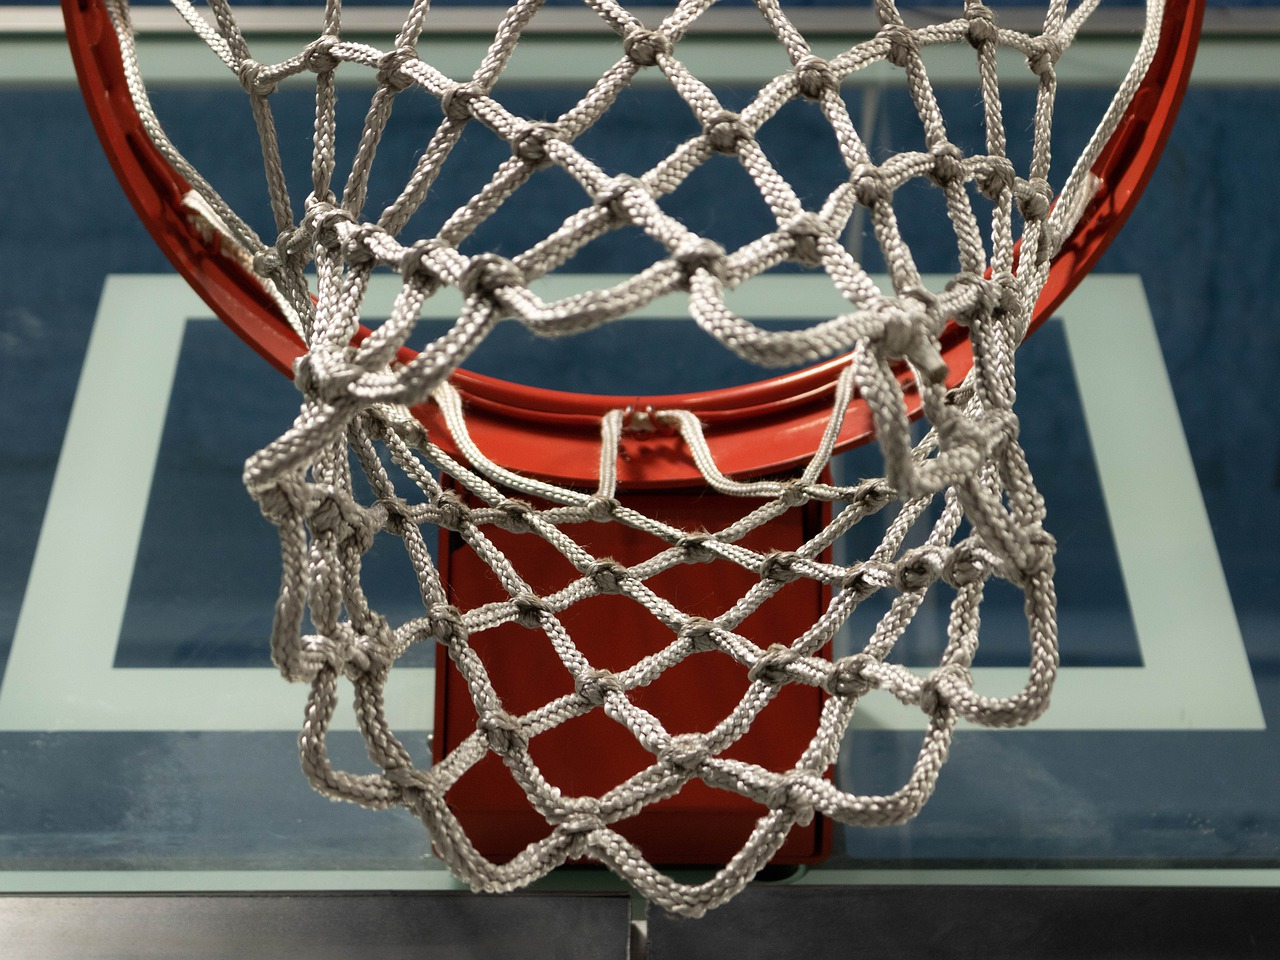 Types of Basketball Nets